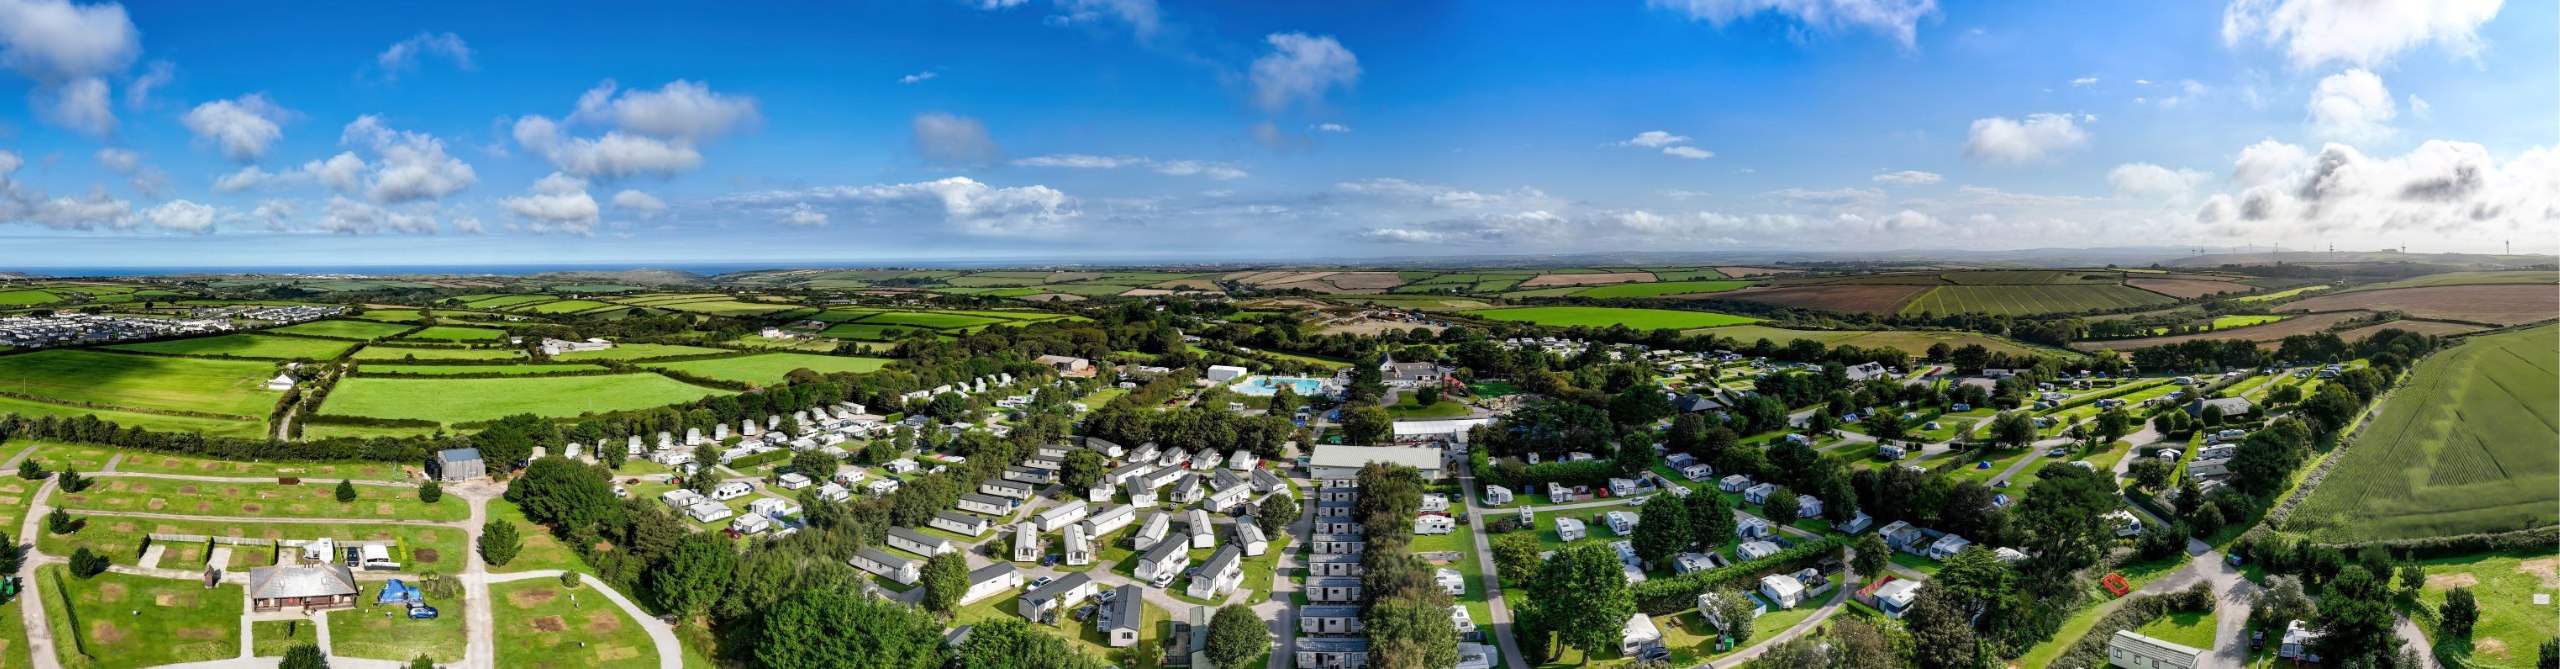 Panoramic aerial view of a rural landscape featuring clusters of holiday homes, extensive green fields, and a clear sky.